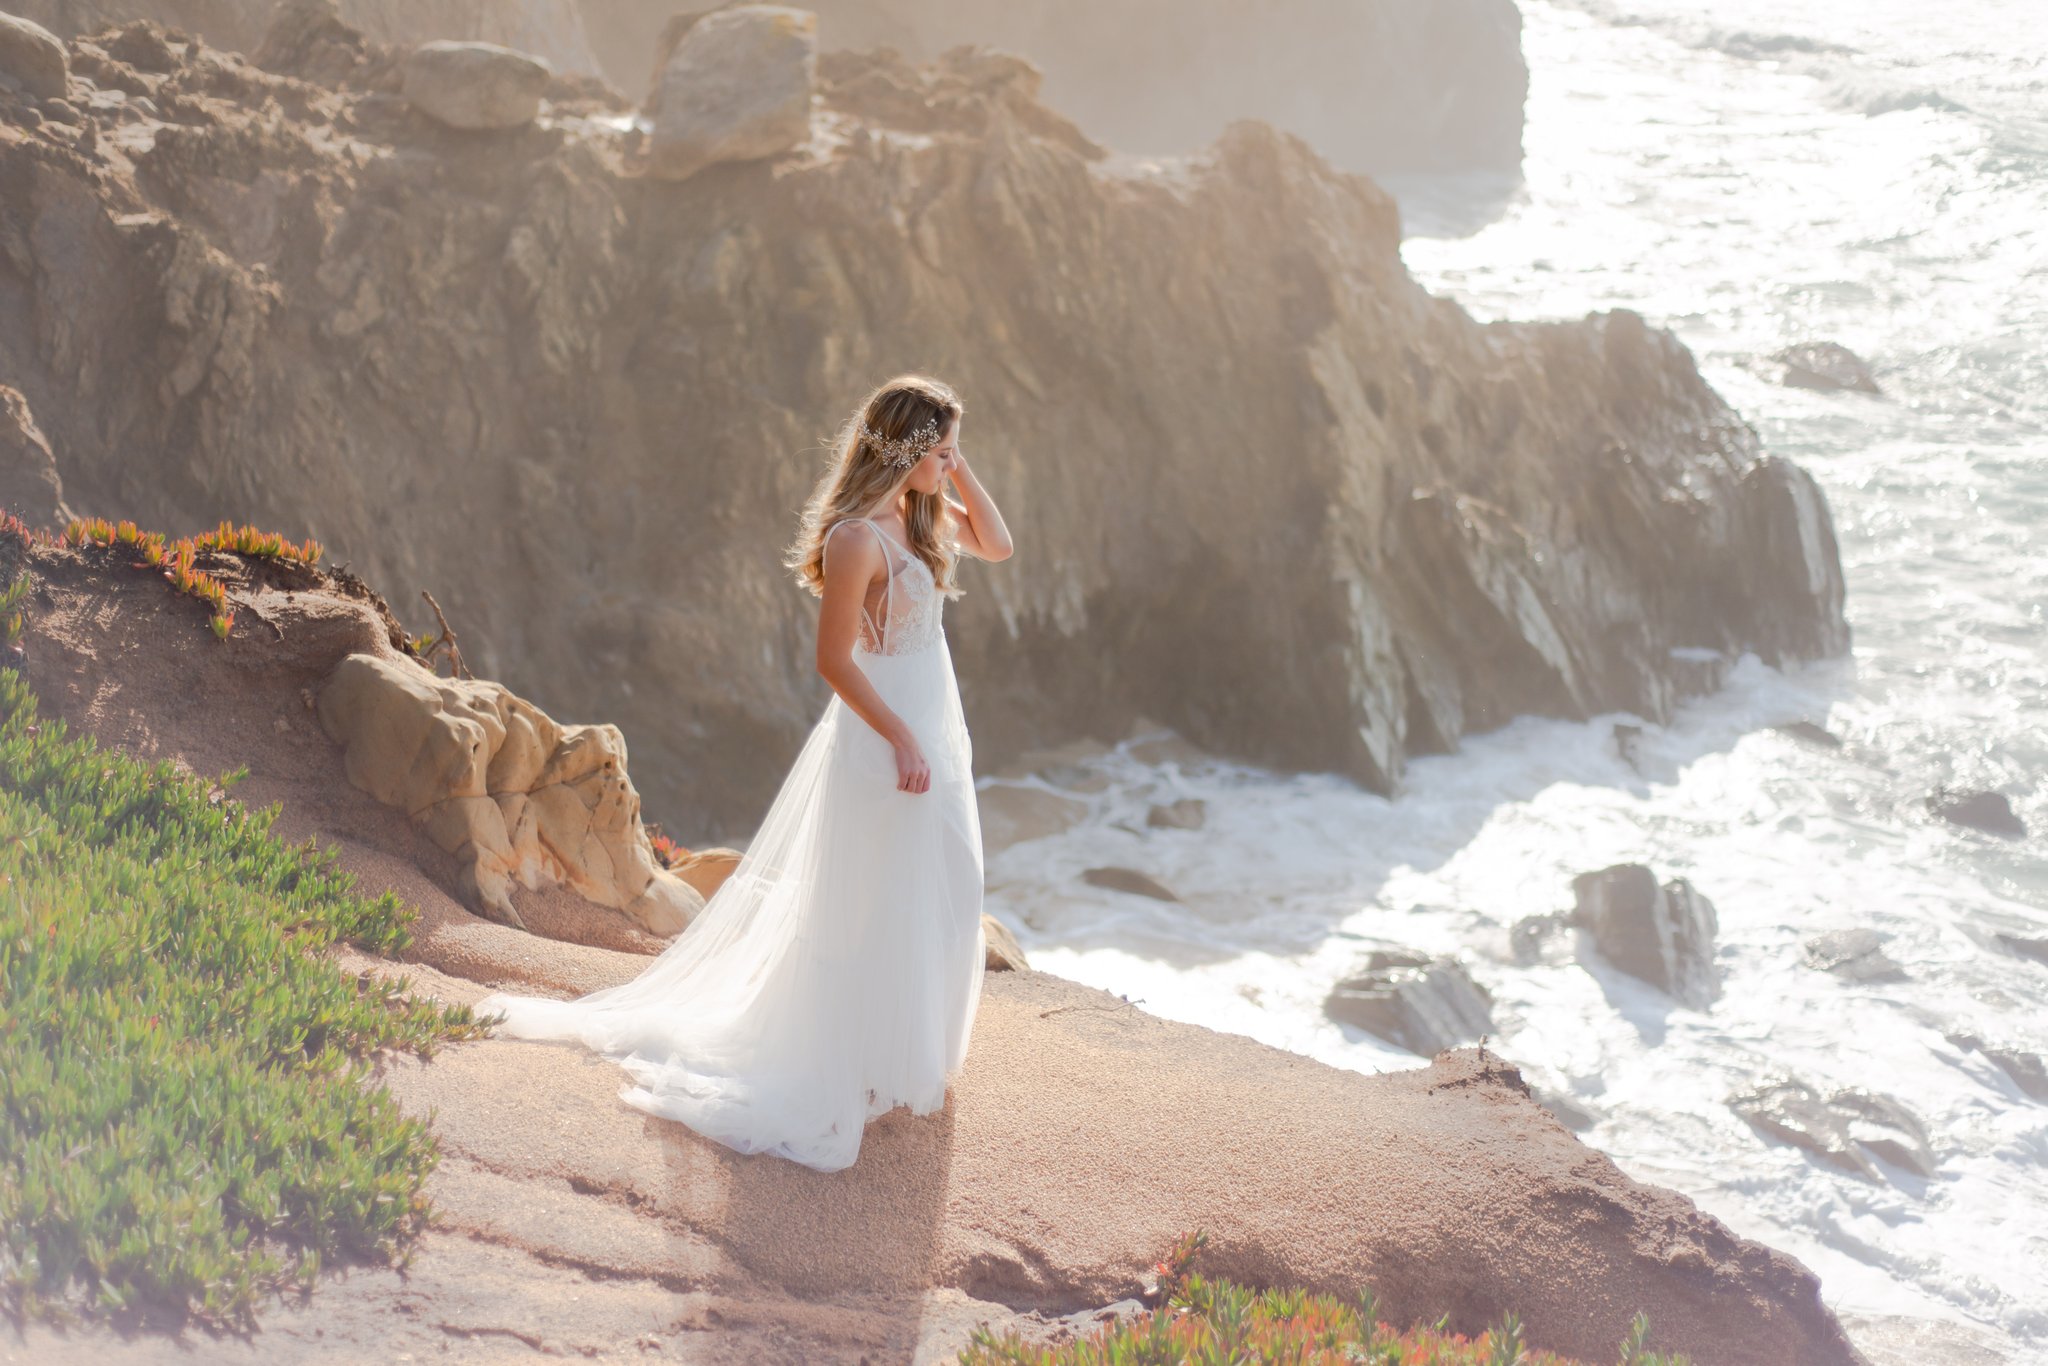 Jen Vazquez Photography. eloping in California Elopements in Yosemite, Lake Tahoe, and the Beaches or Coastlines of California